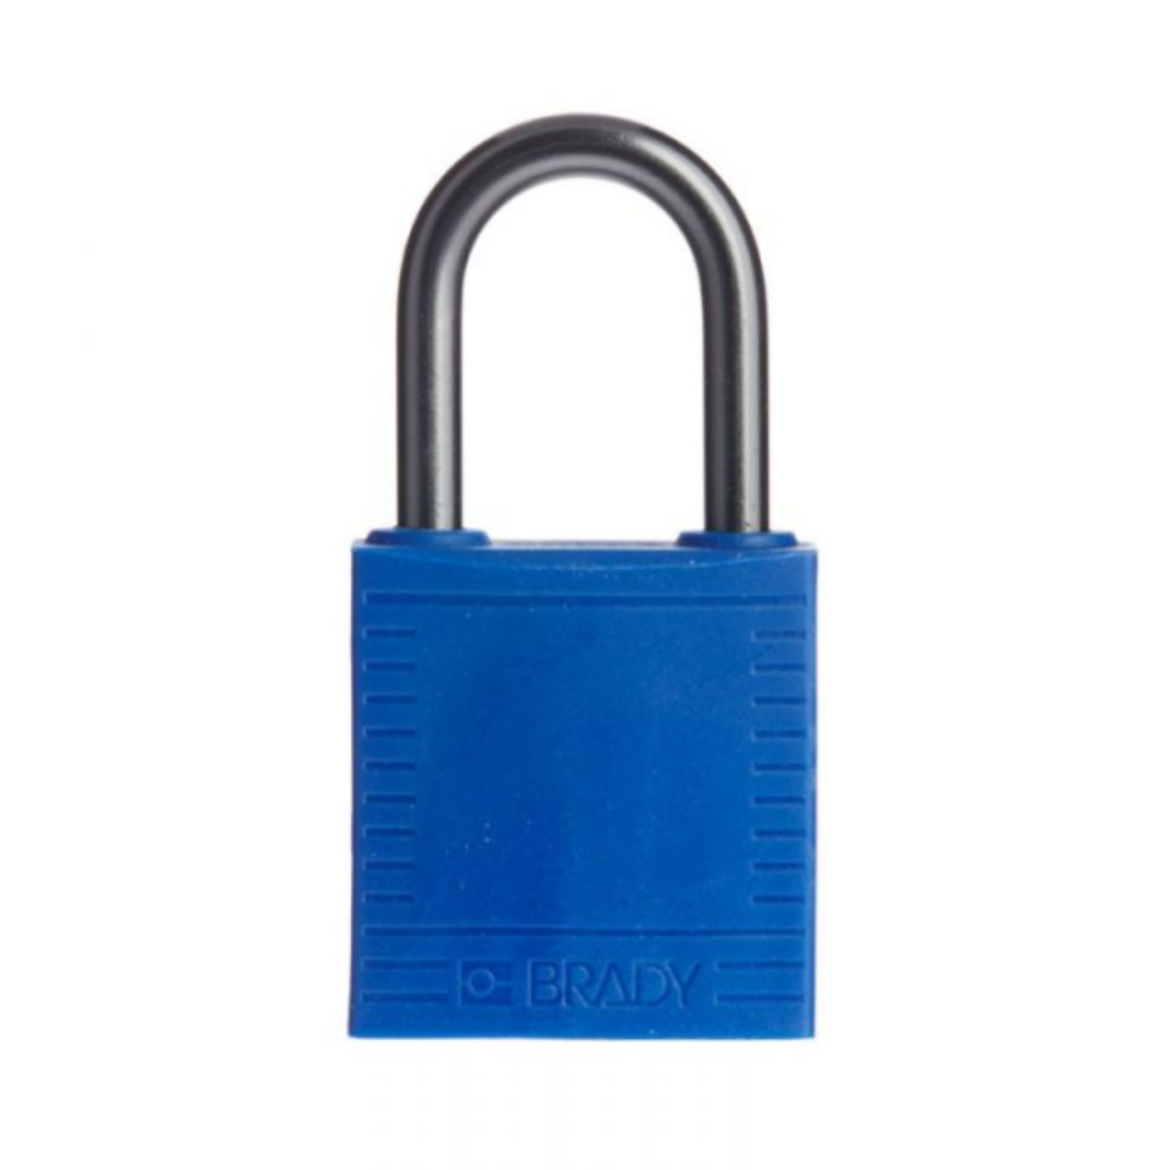 Picture of BRADY COMPACT LOCKOUT PADLOCK BLUE